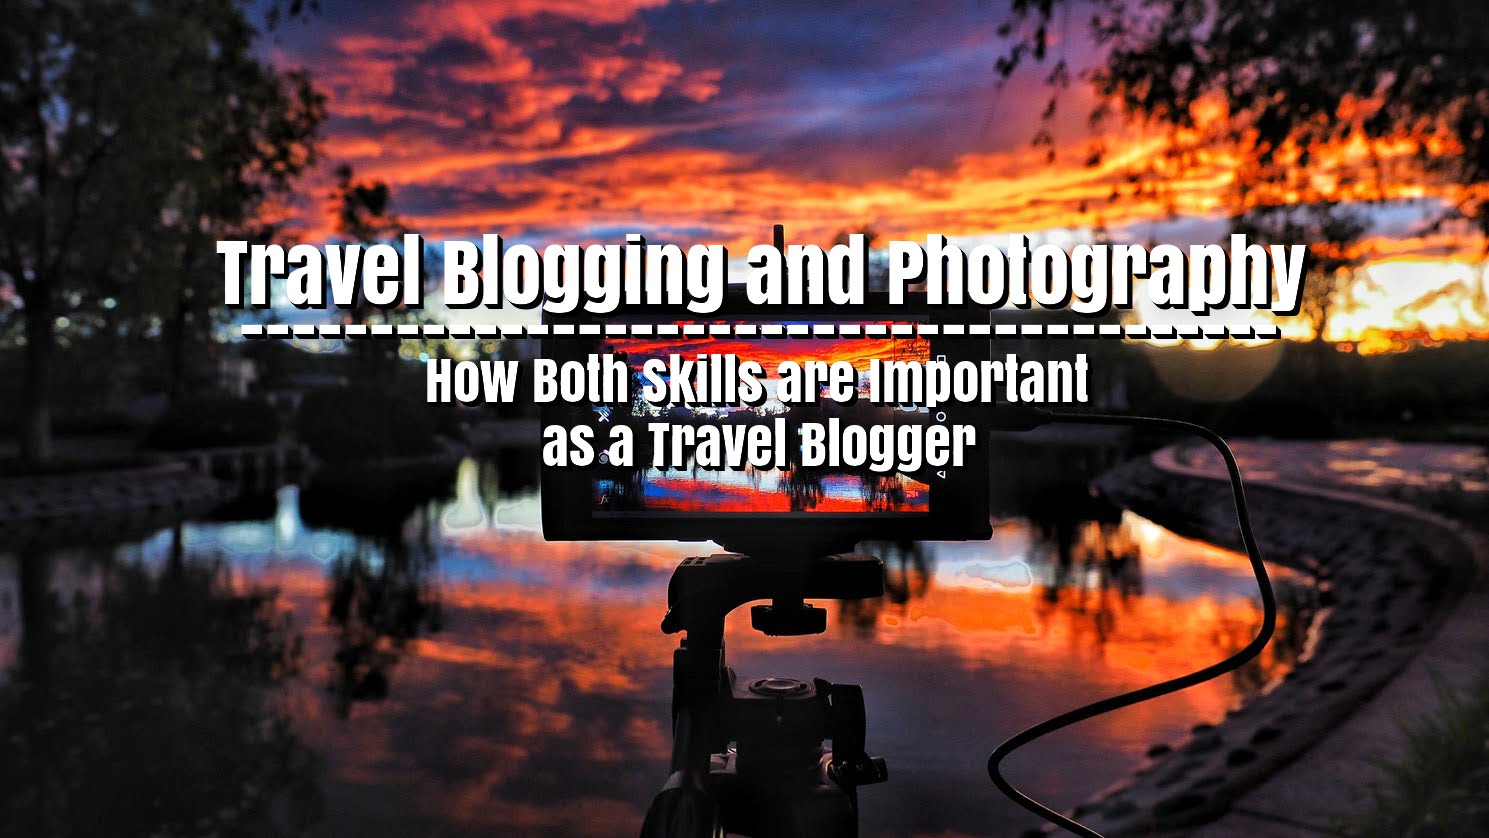 Travel Blogging and Photography | How Both Skills are Important as a Travel Blogger